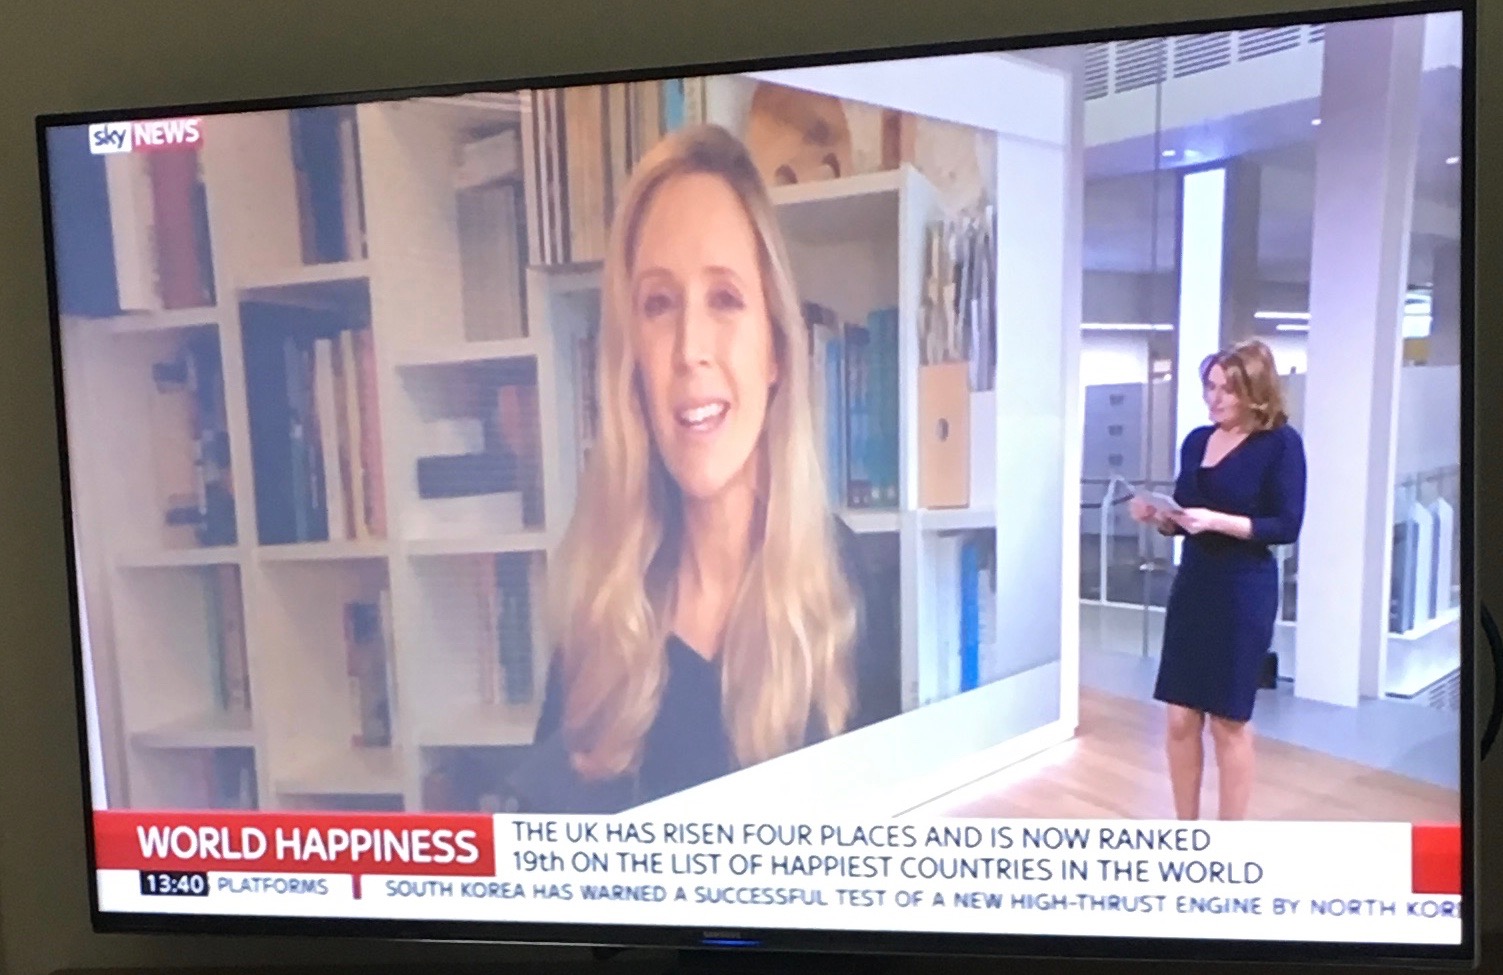 Sky News on Twitter “What makes Scandinavians so happy? @MsHelenRussell, author of 'The Year Of Living Danishly', sheds some light on the subject